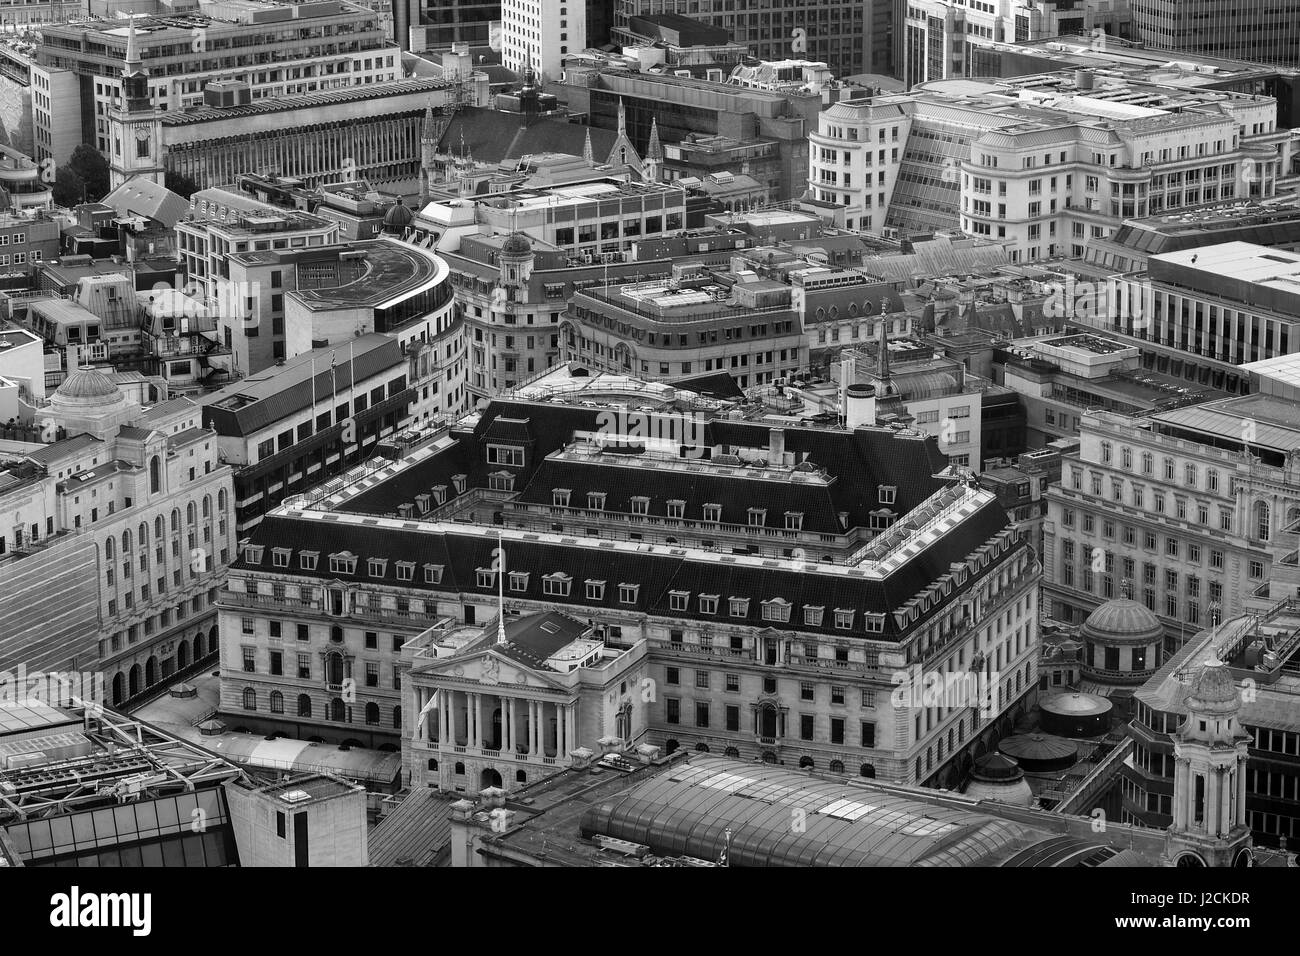 Aerial view of the Bank of England Stock Photo